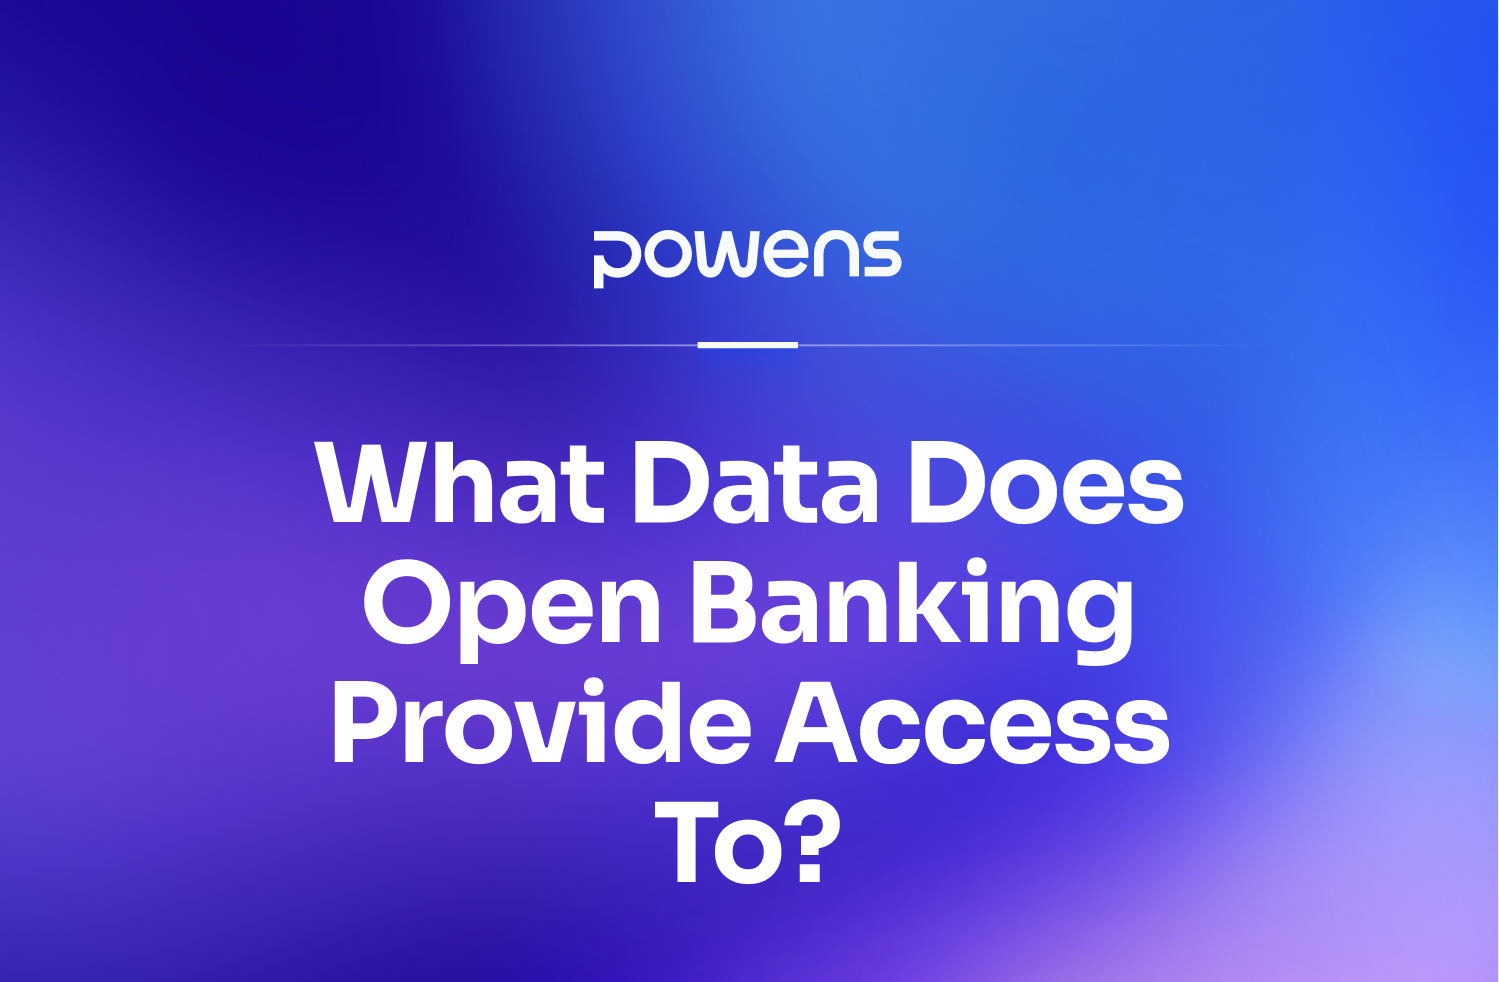 What Data Does Open Banking Provide Access To?